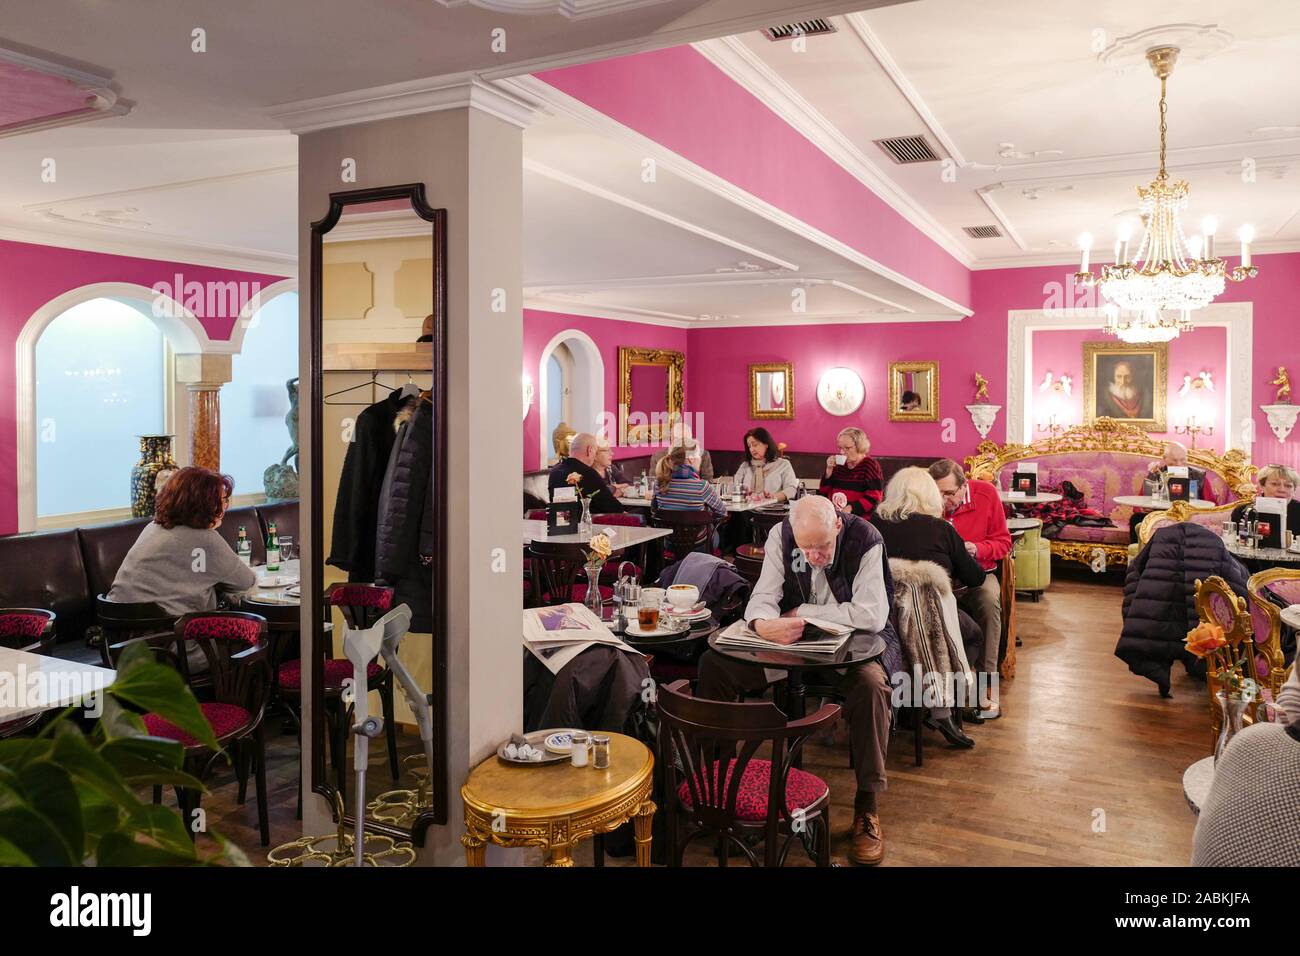 The long-established Cafe Belstner in the old town of Landshut closes at the end of January 2019. [automated translation] Stock Photo